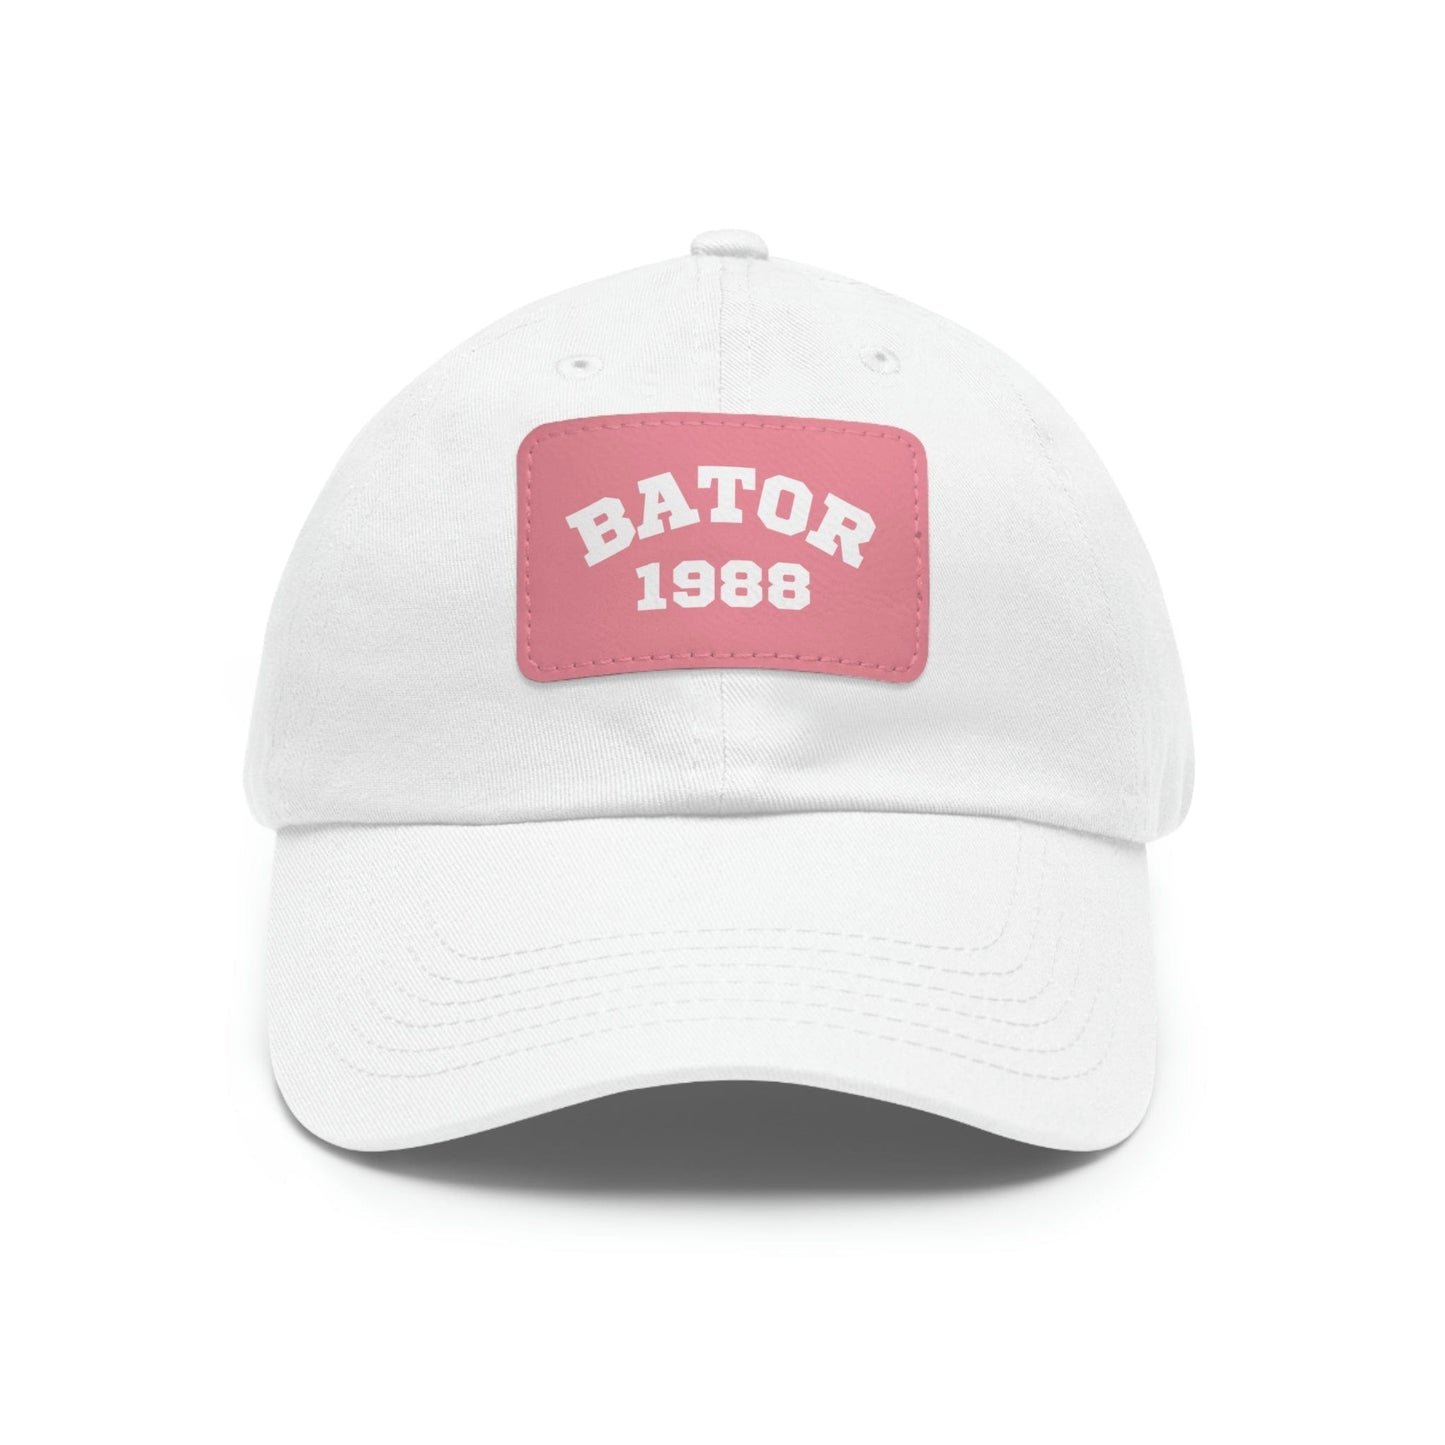 Hats White / Pink patch / Rectangle / One size OG Bator Dad Hat LEATHERDADDY BATOR